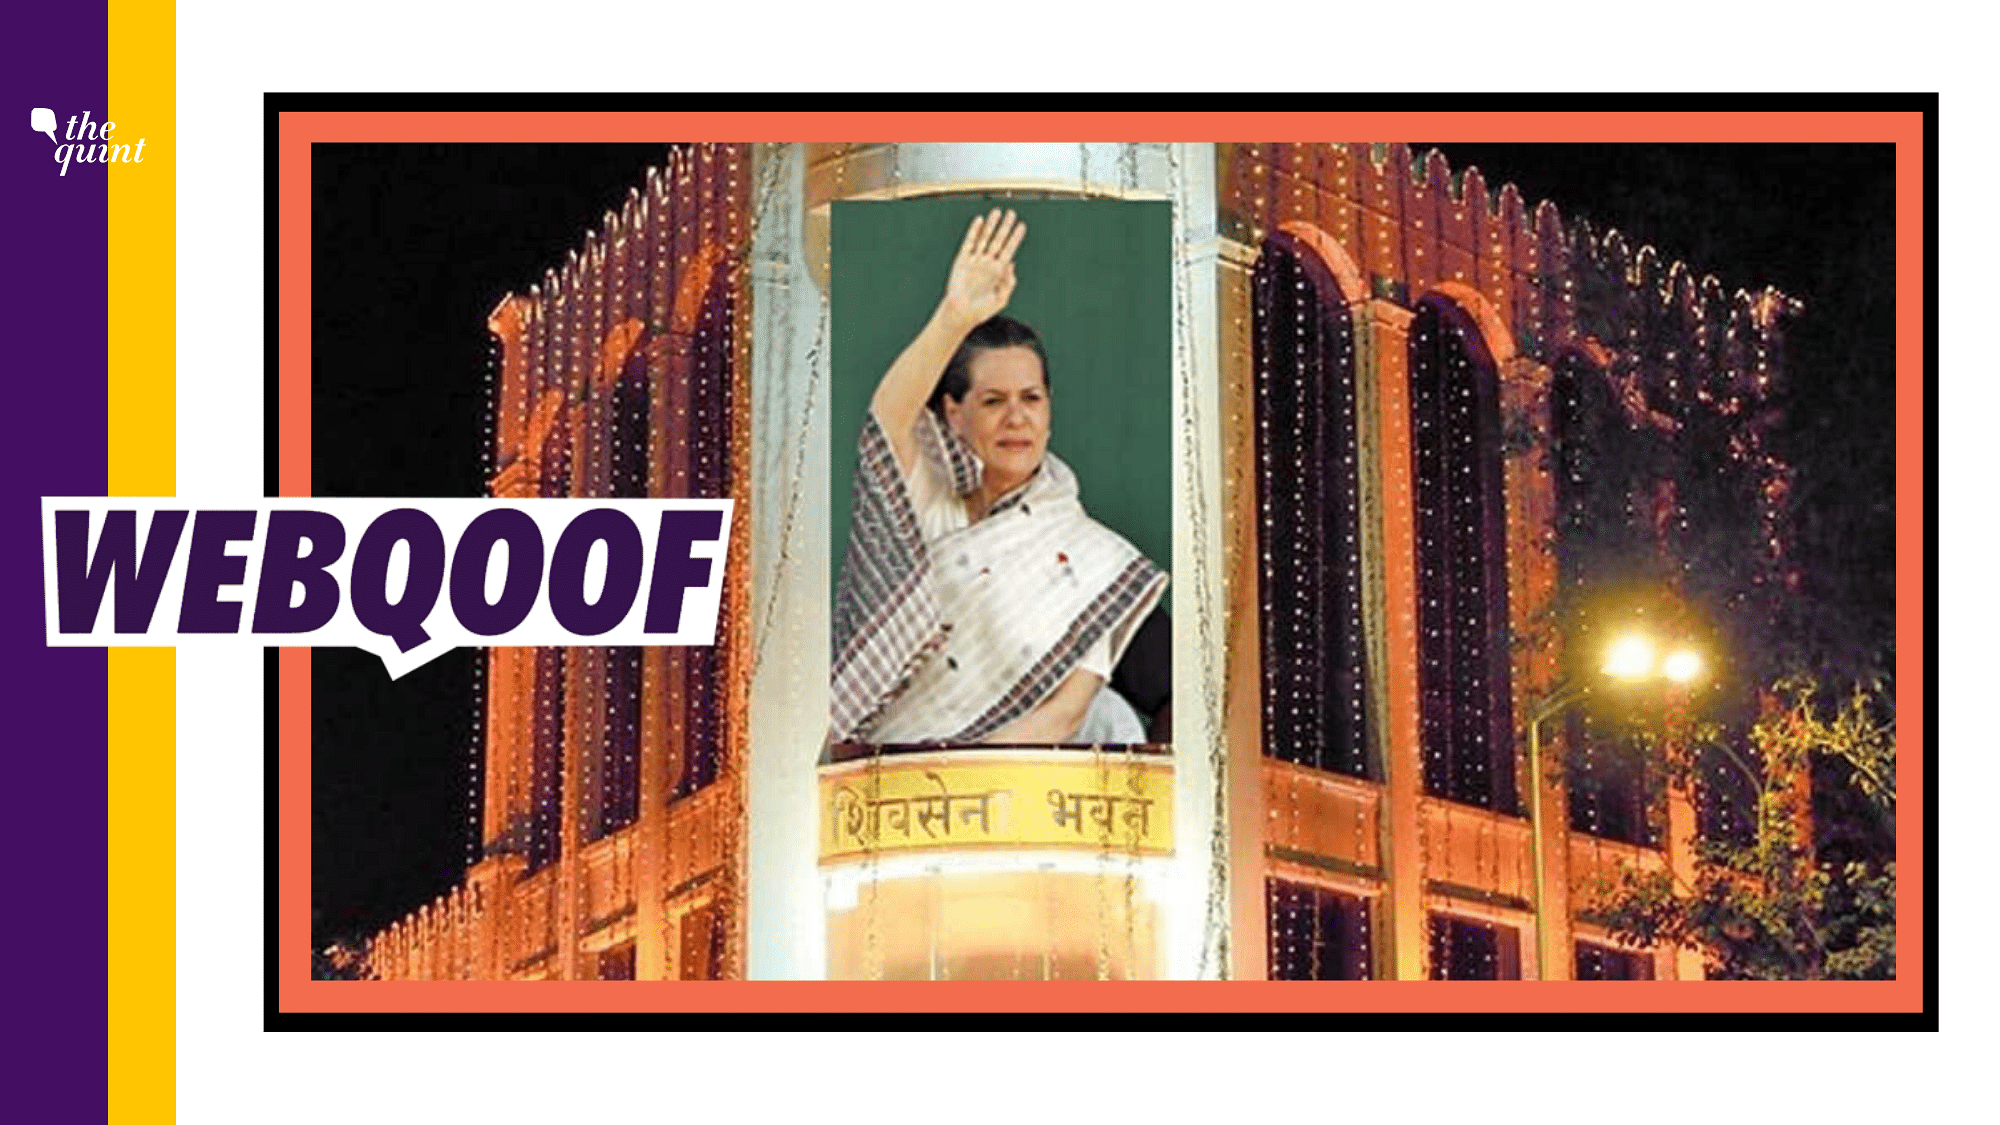 A morphed image of Sonia Gandhi featuring on a poster on the facade of Shiv Sena Bhavan.